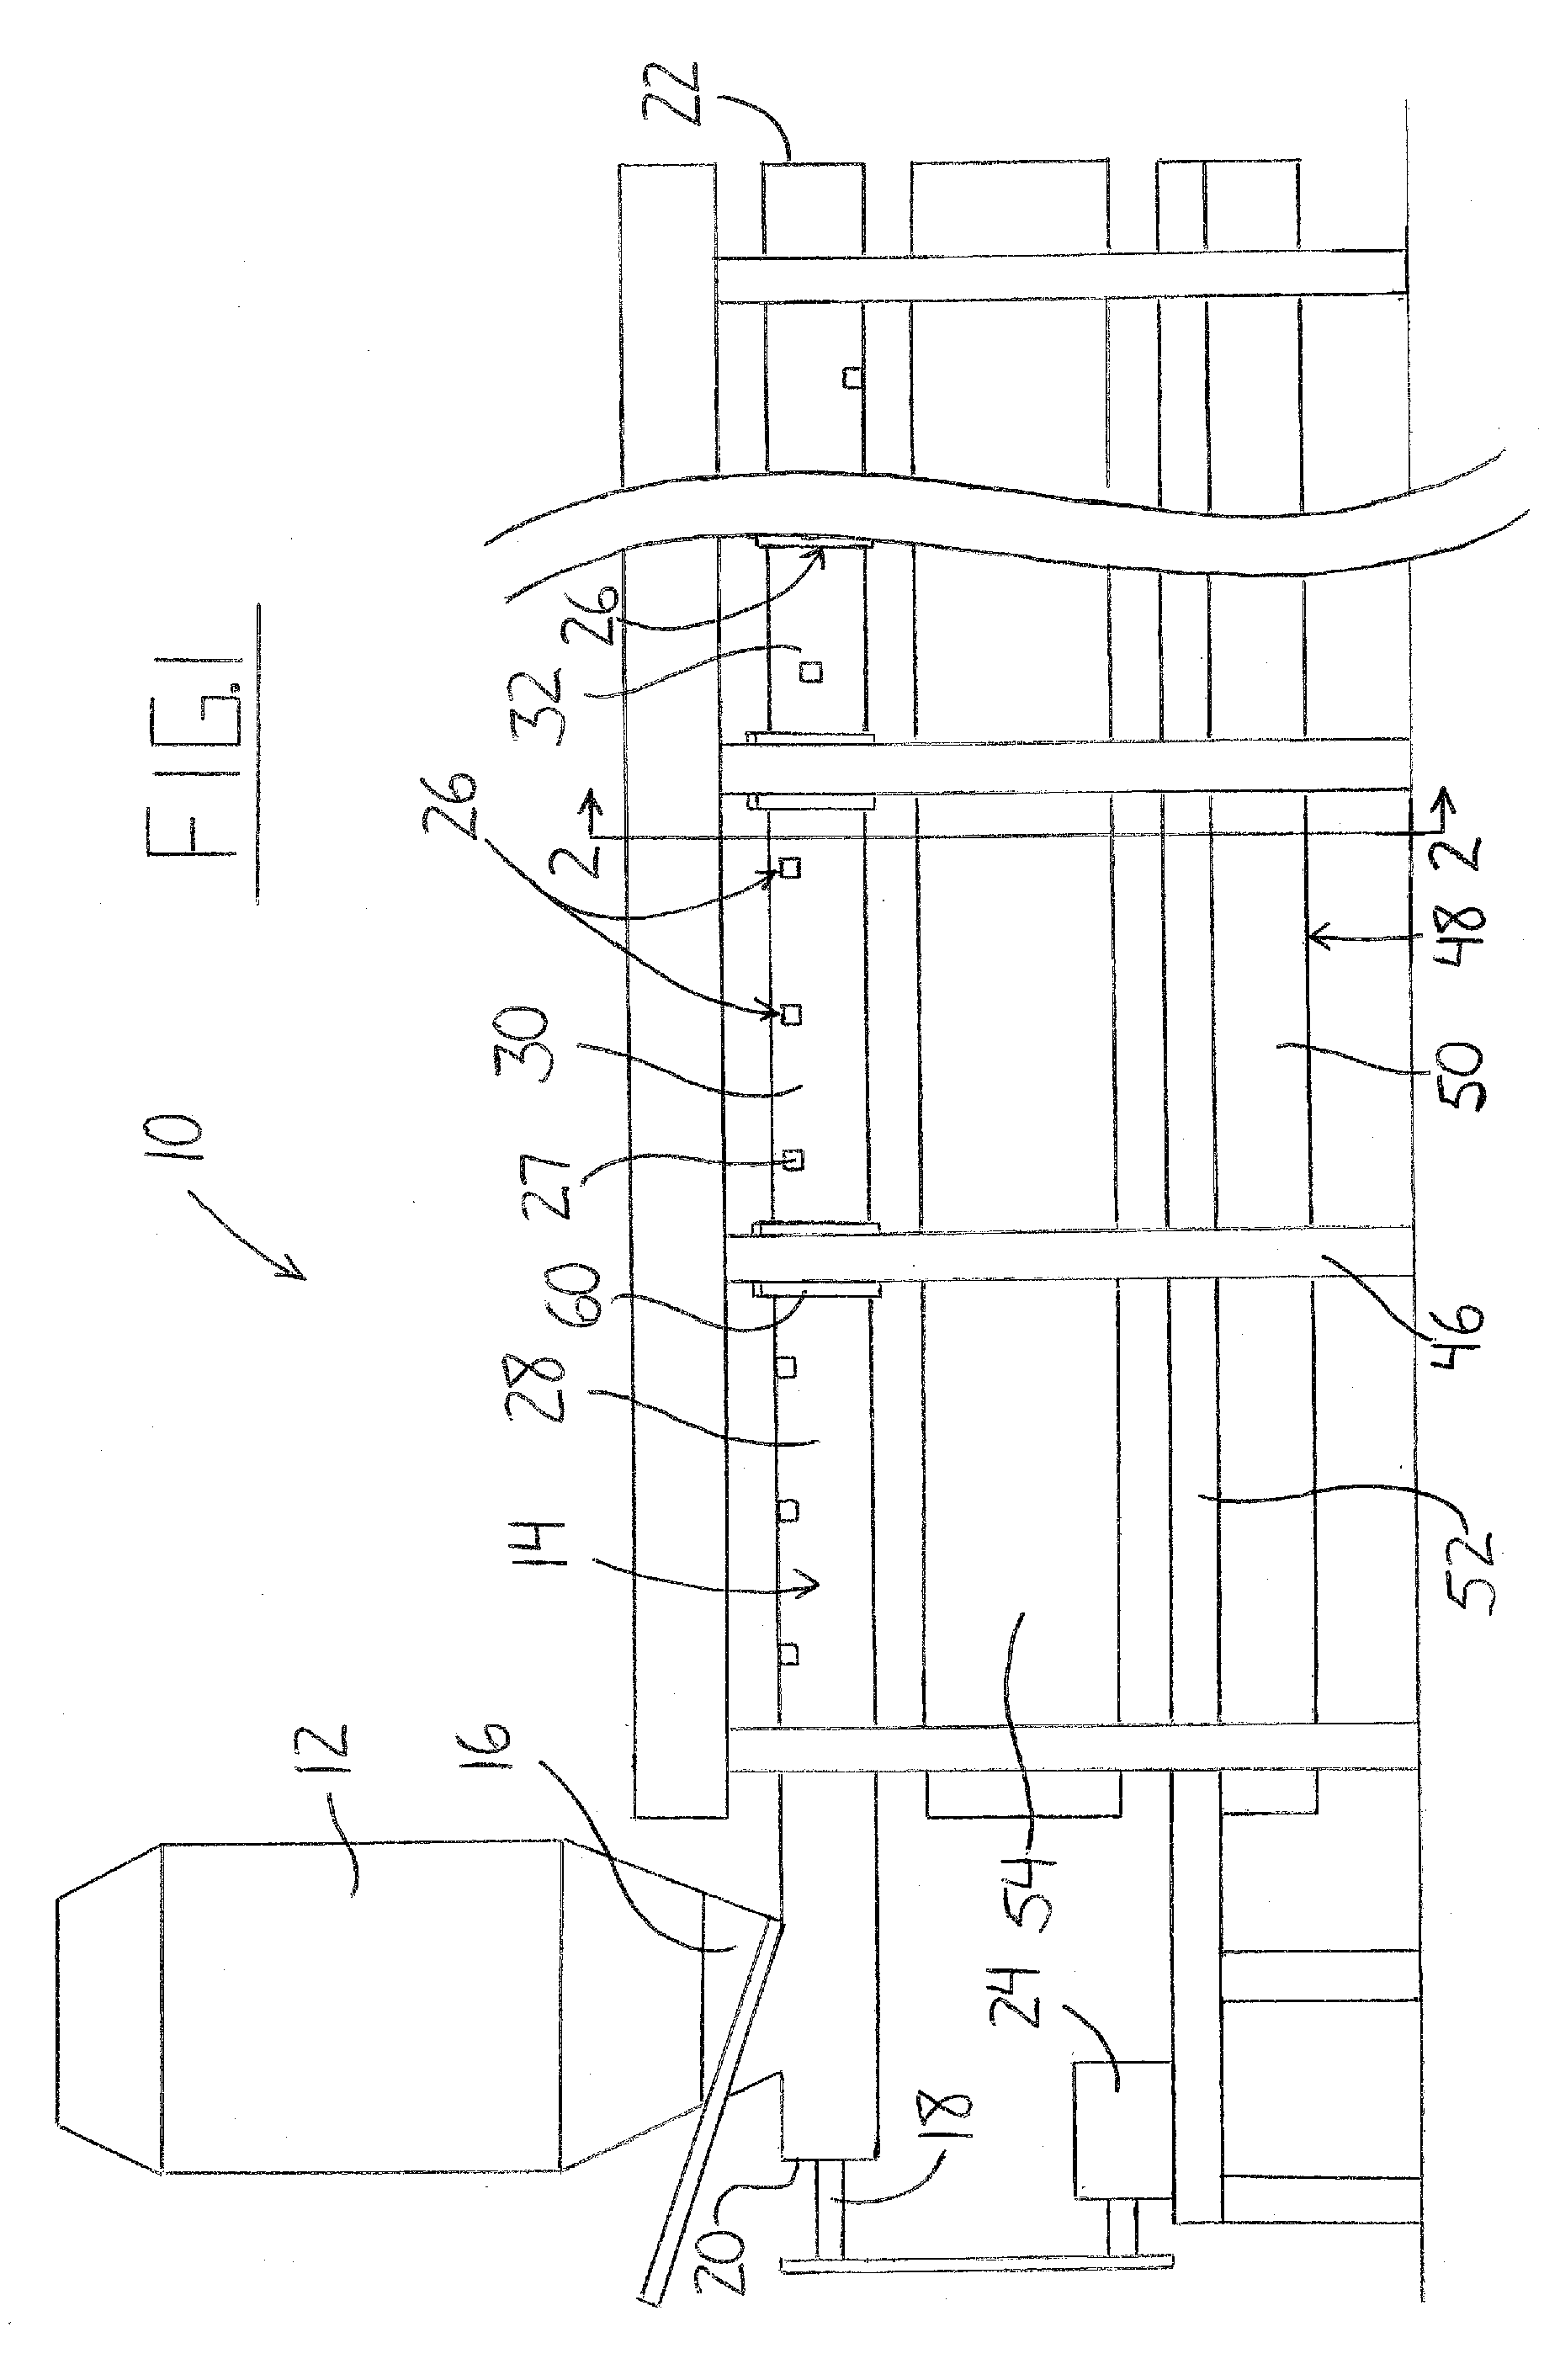 Method and Apparatus for Discharging Material at Spaced Intervals